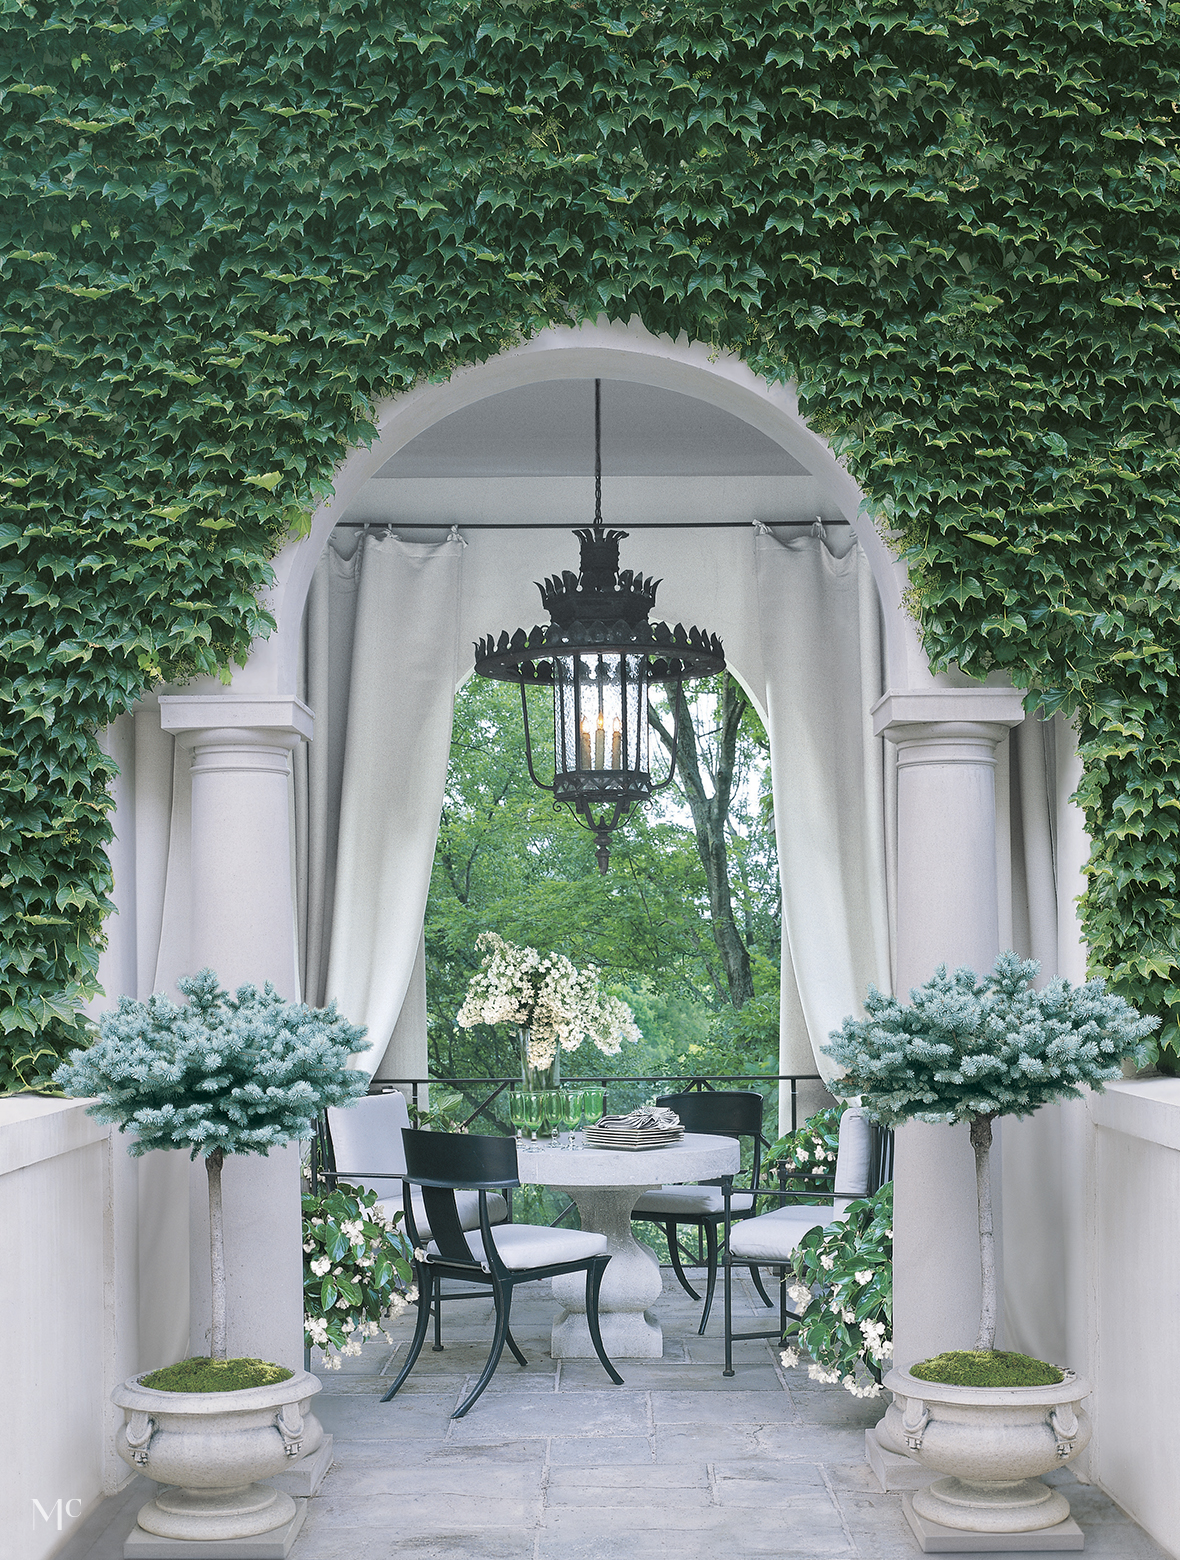 Décor Inspiration | Classic Romance: Old Meets New in this Nashville Home